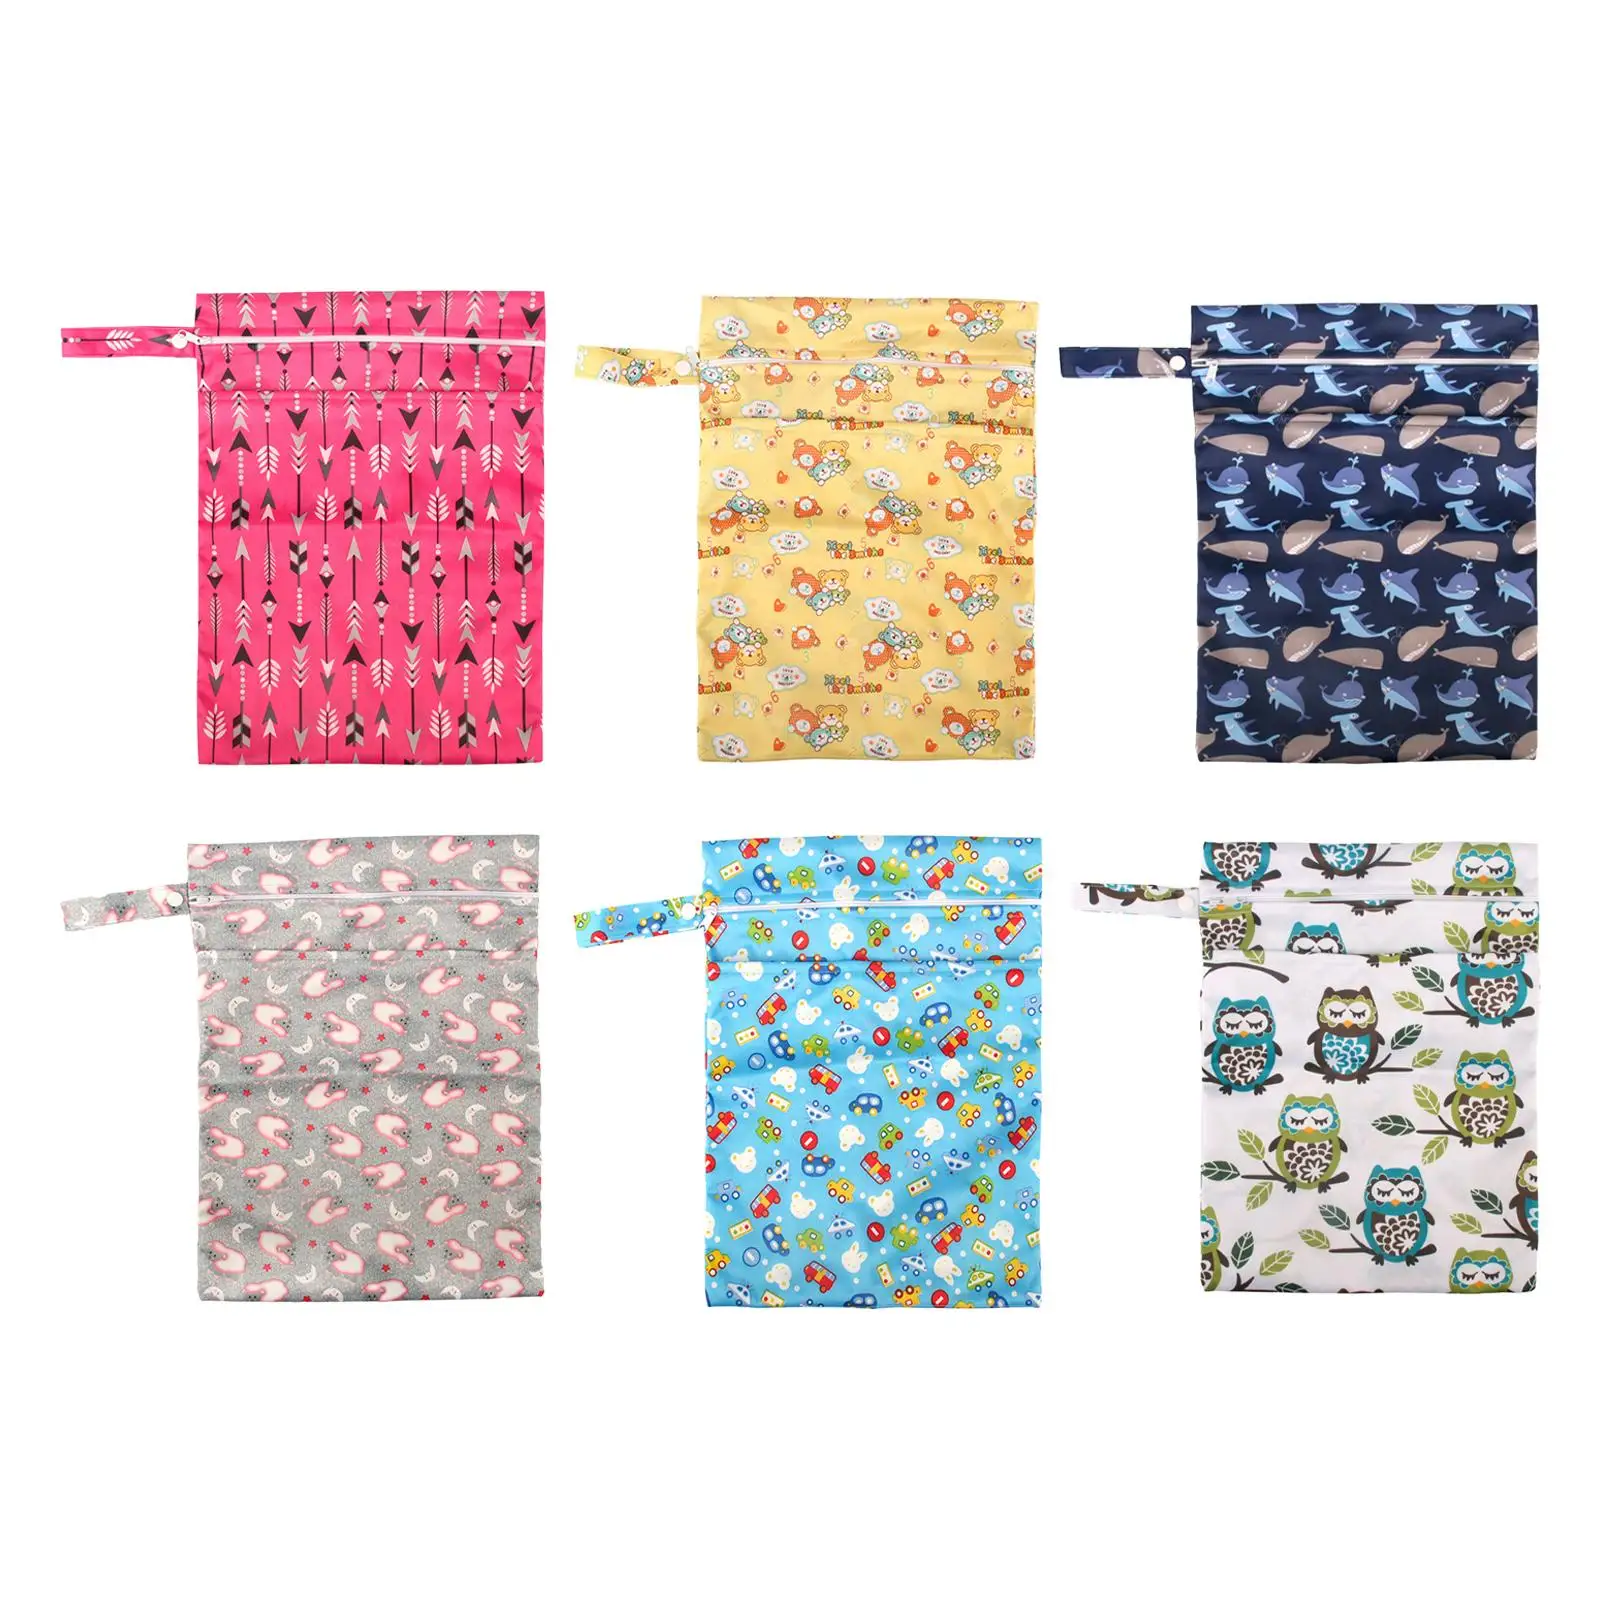 Diaper Pouch Printed Pocket Mummy Bag Baby Nappy Bag Stroller Diaper Storage Bag for Outdoor Beach Daycare Shopping Travel